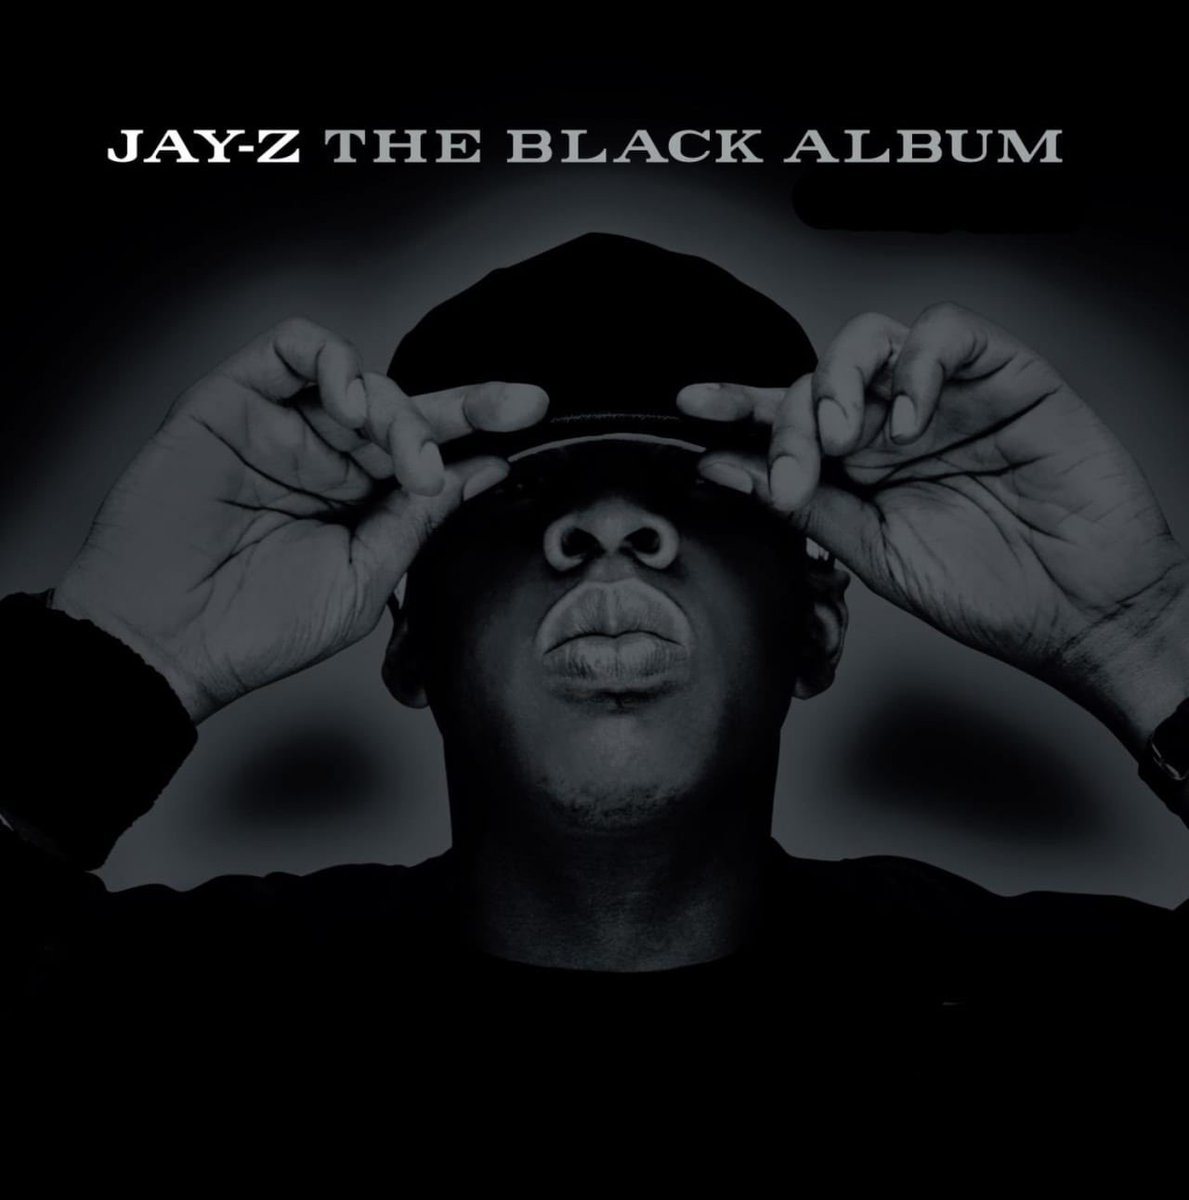 2003: The Black Album - Jay-ZOne of the hardest years to pick for me, but this project is just too good. I love the features, the production, and the confidence that Hov hasFave tracks: public service announcement, december 4, moment of clarityHm: Get rich or die trying